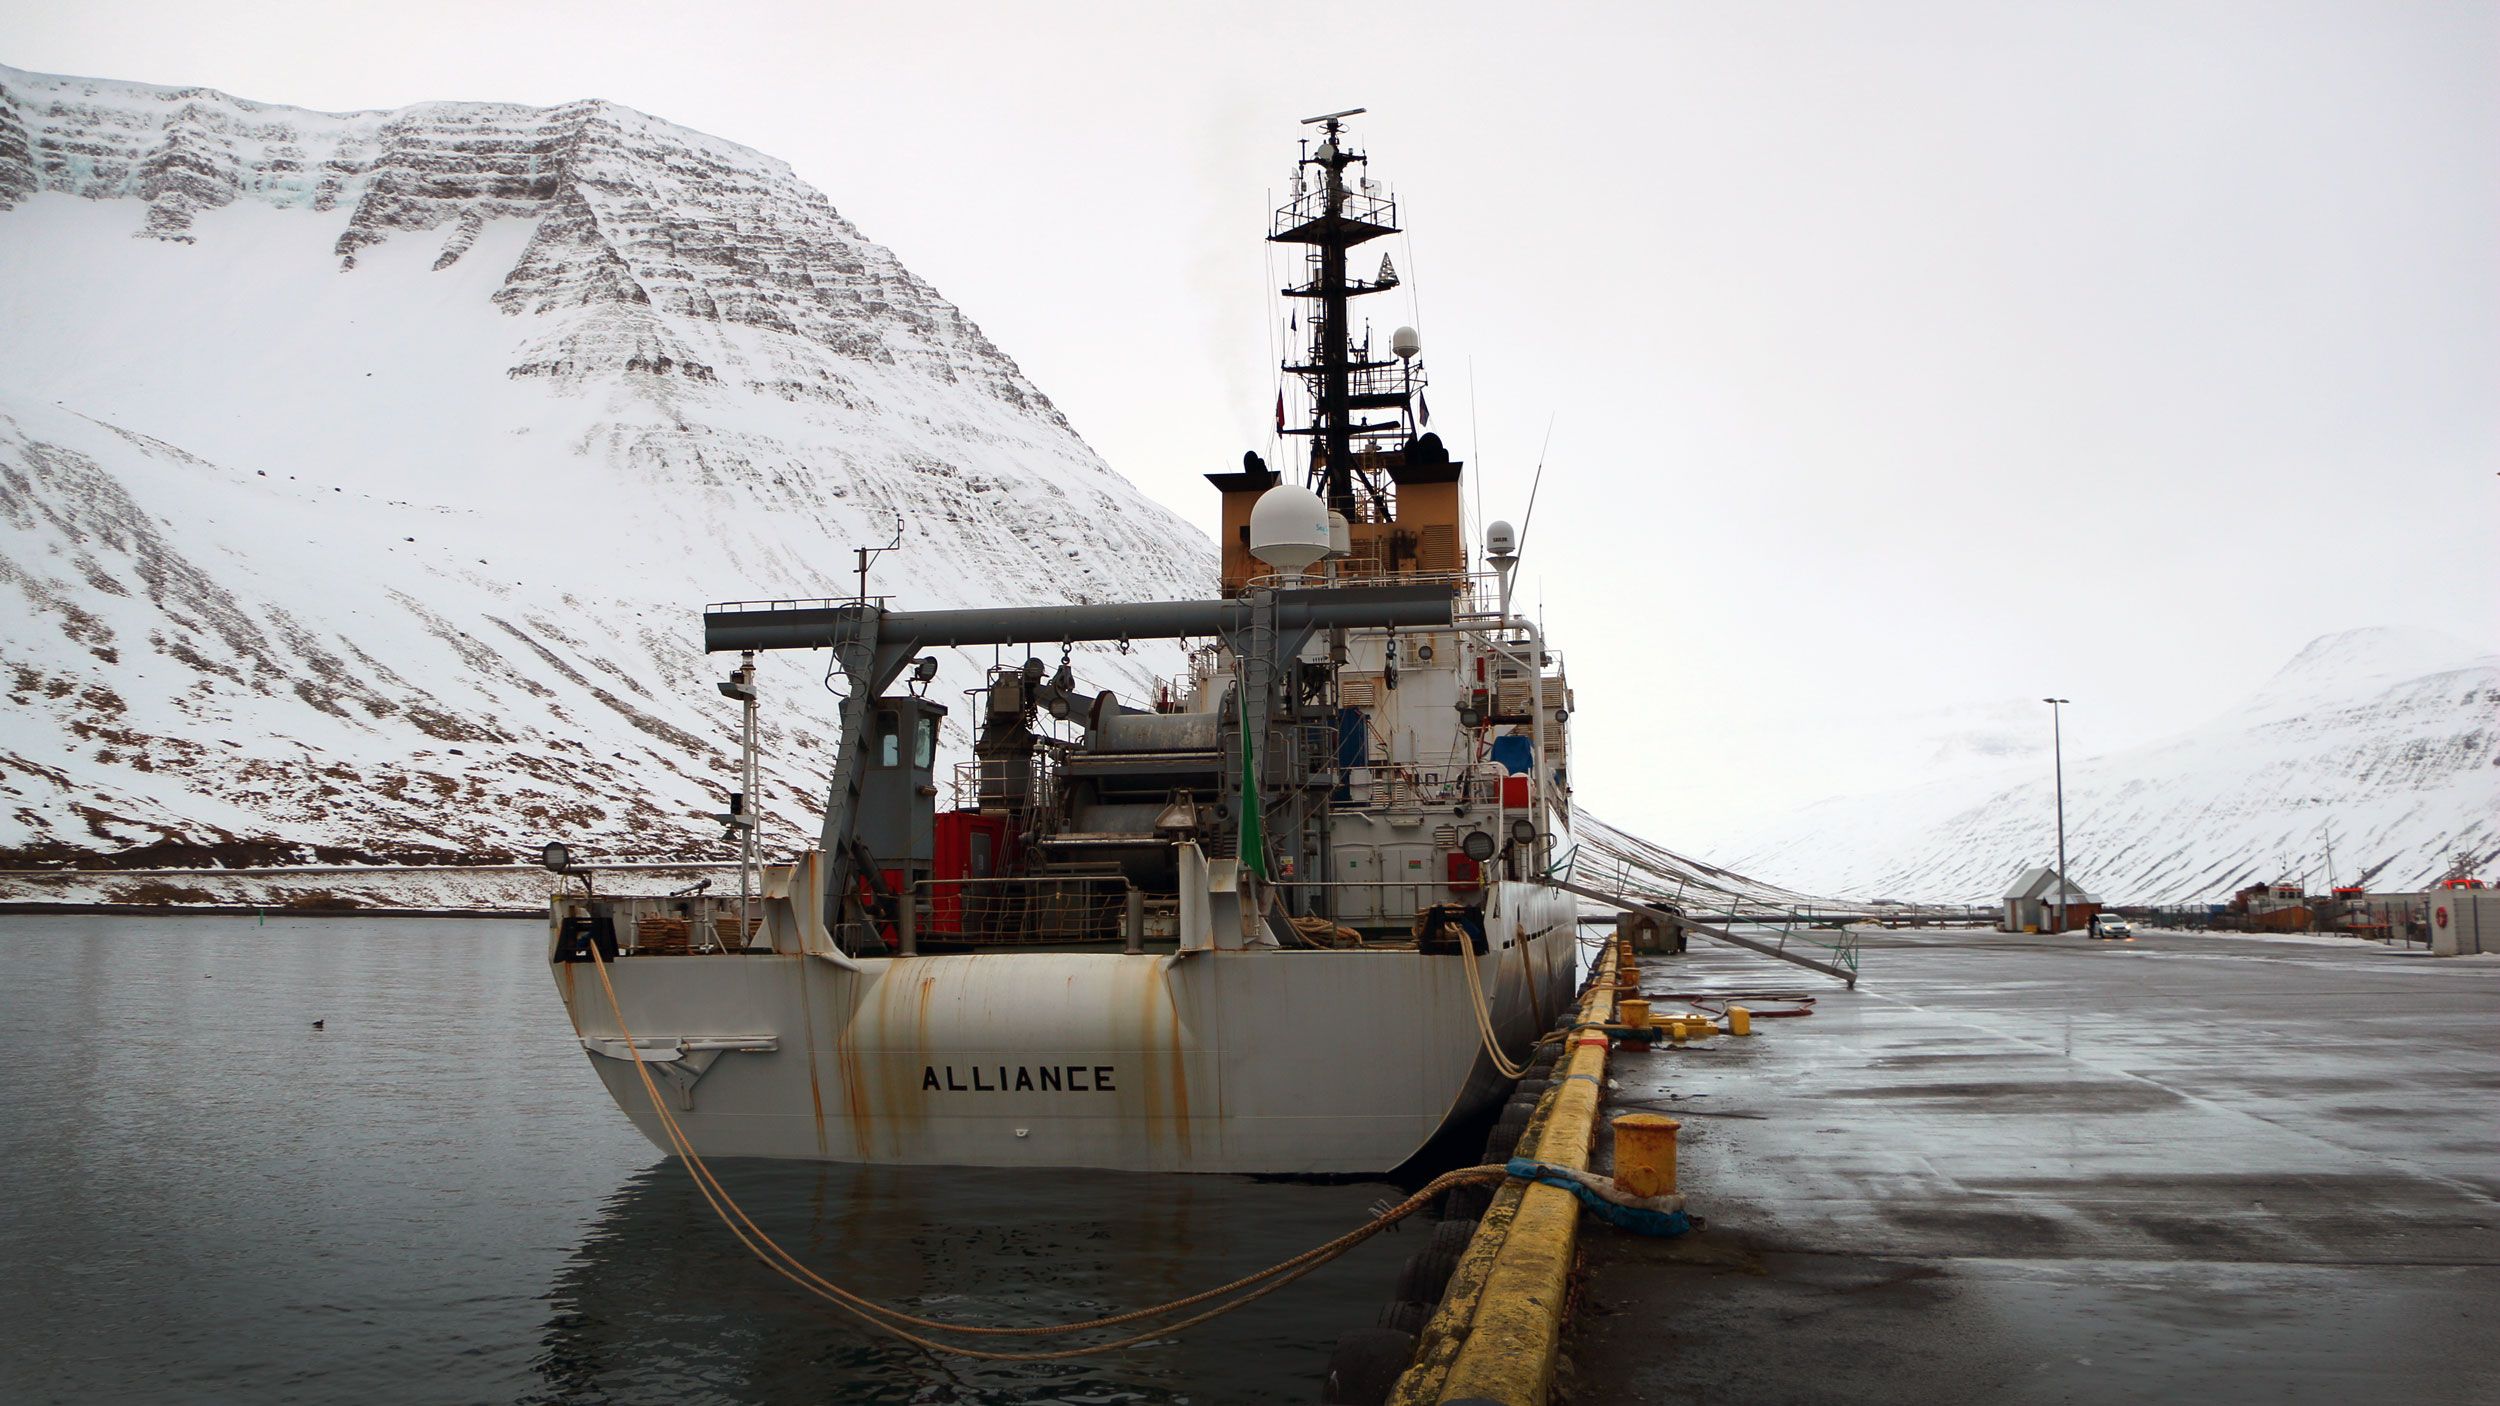 The R/V Alliance docked in Ísafjörður, Iceland, between the two legs of the research cruise. Image by Ari Daniel. Iceland, 2018.